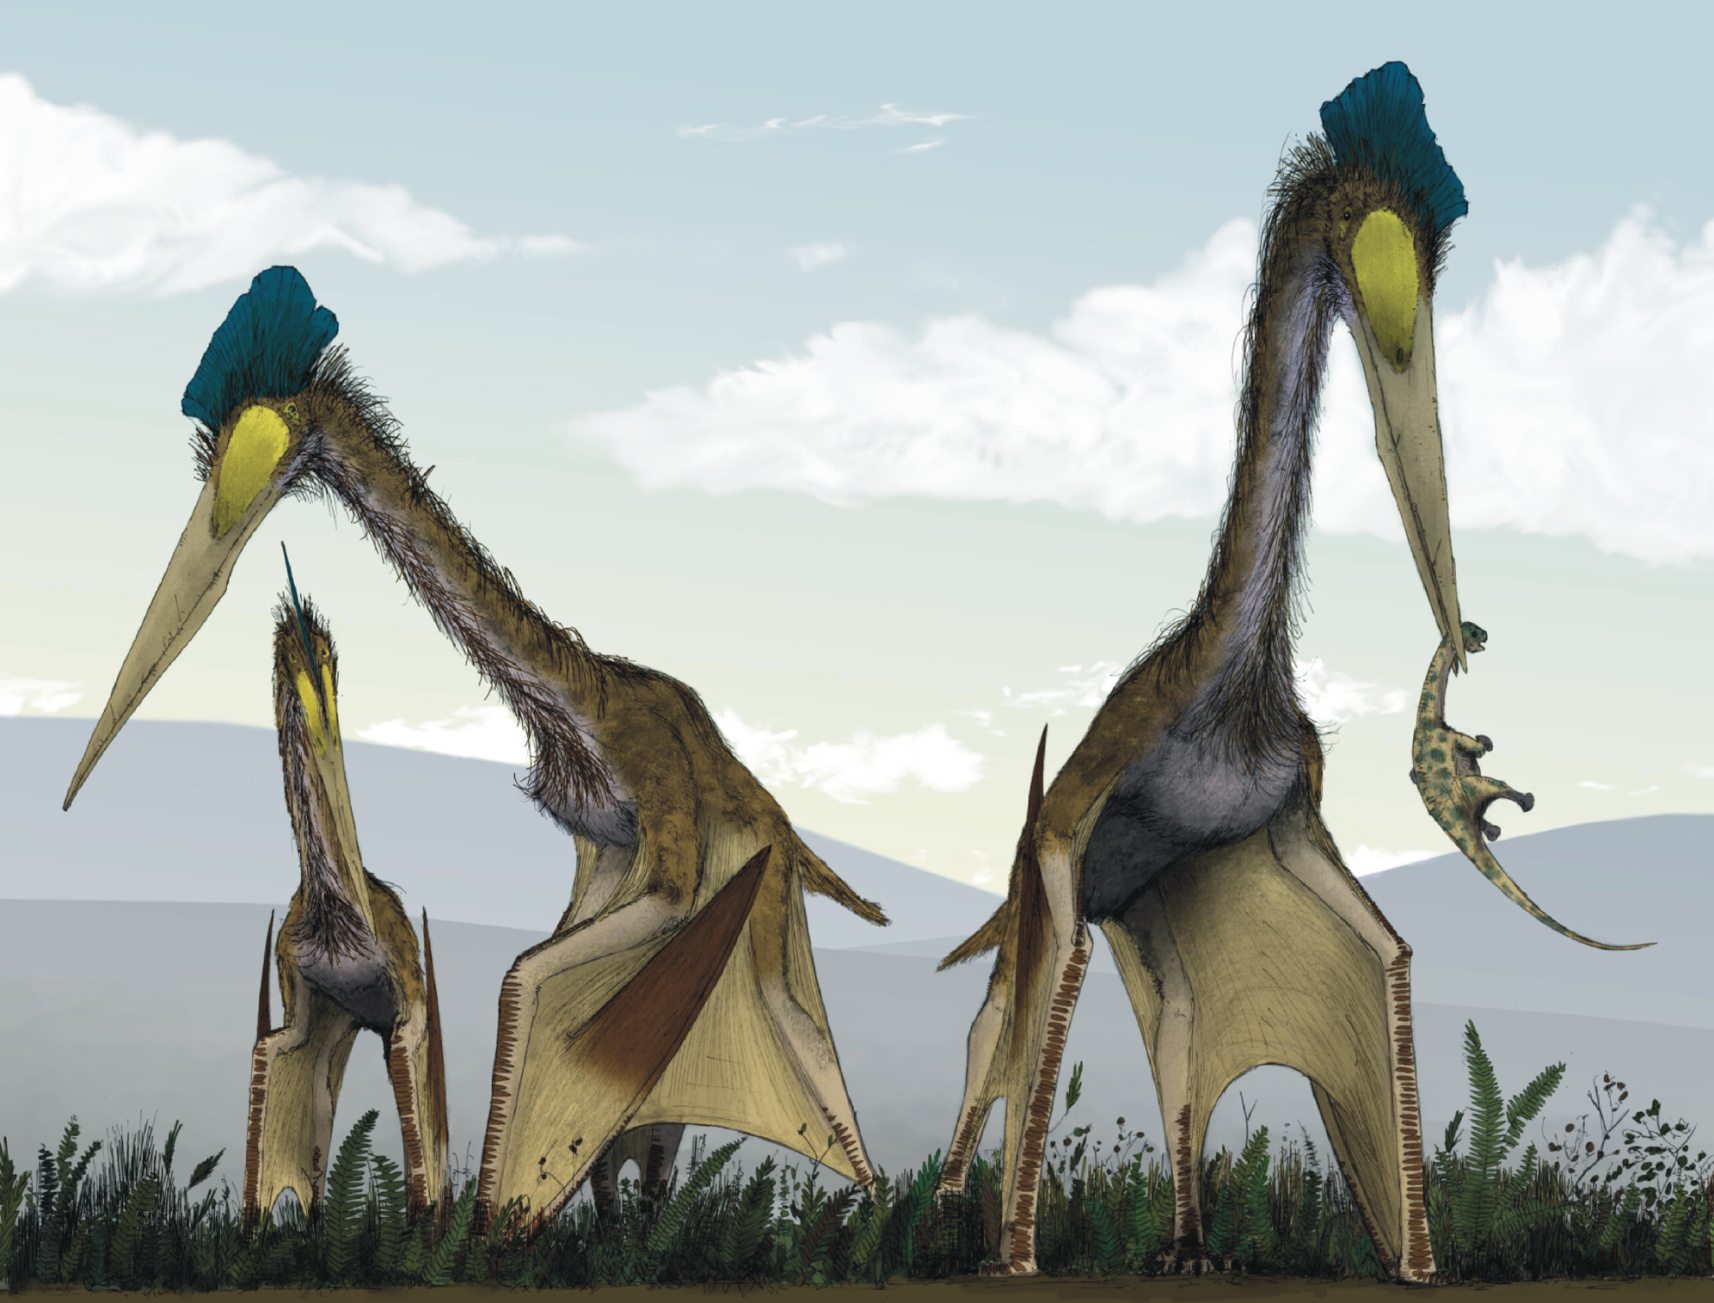 Quetzalcoatlus, thought to be the largest flying animal in Earth history had a wingspan of 35 feet. It could fly up to 80 miles an hour for 7 to 10 days at altitudes of 15,000 feet with a maximum range between 8,000 and 12,000 miles.